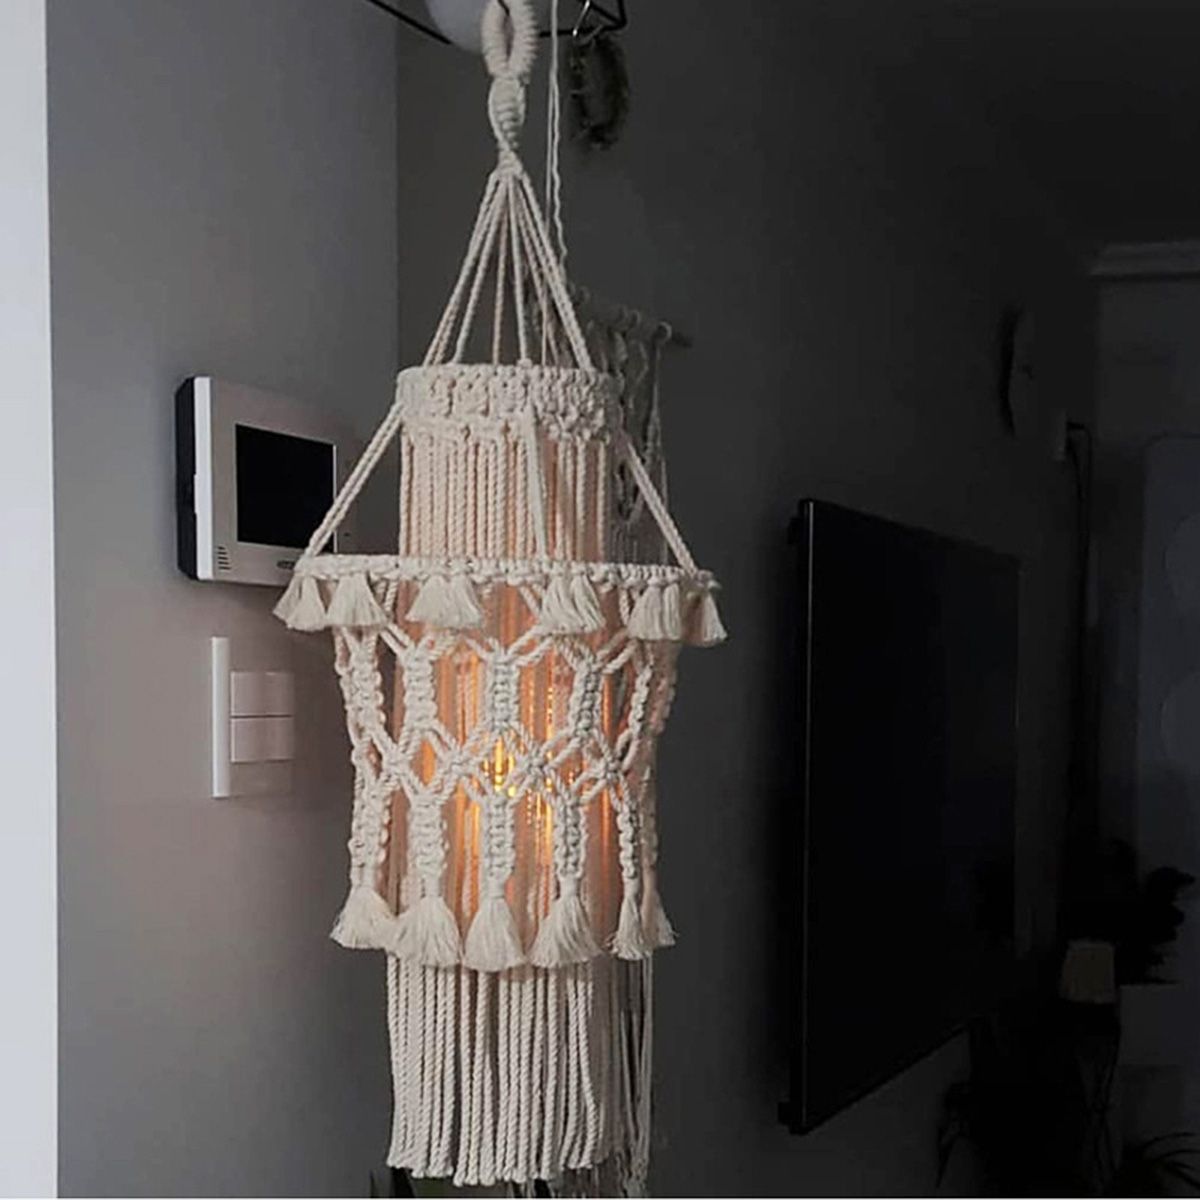 30x60CM-2-Tier-Lampshade-Ceiling-Light-Cover-Home-Pendant-Lamp-Chandelier-Lamp-Shade-1688920